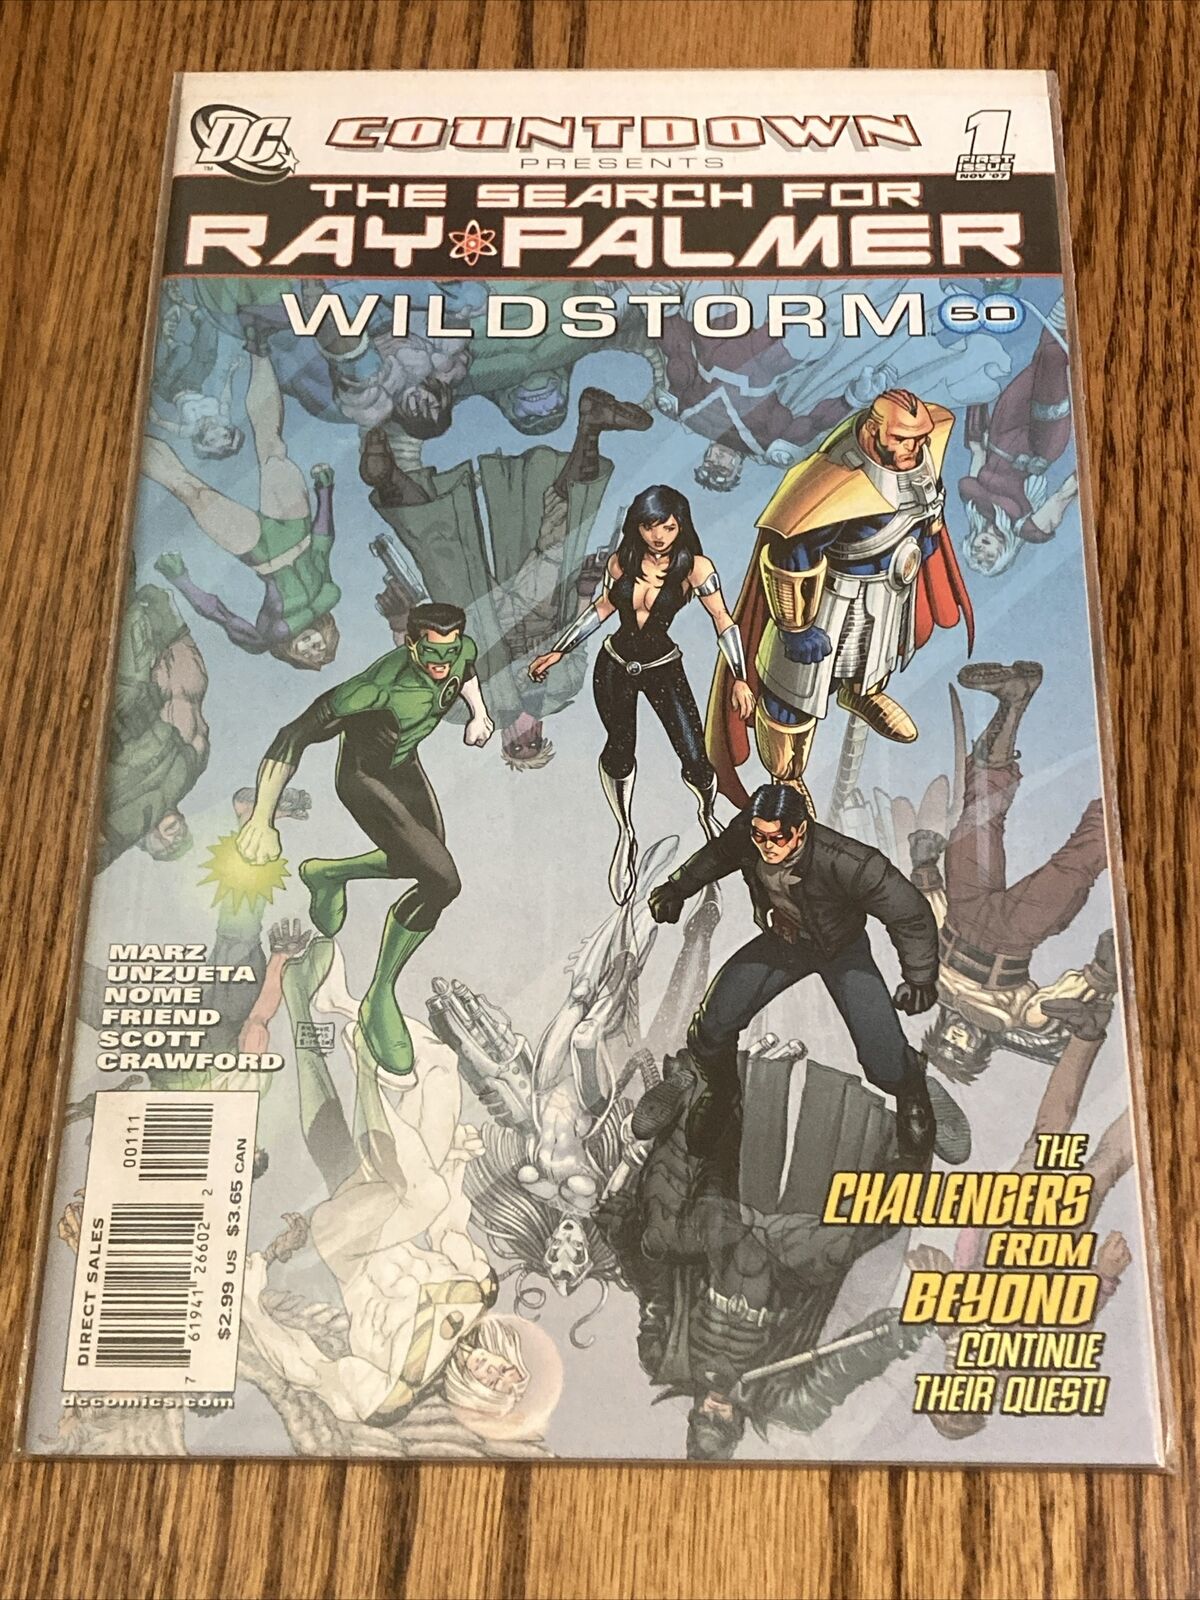 DC Comics Countdown Presents: The Search for Ray Palmer: Wildstorm #1 Nov 2007